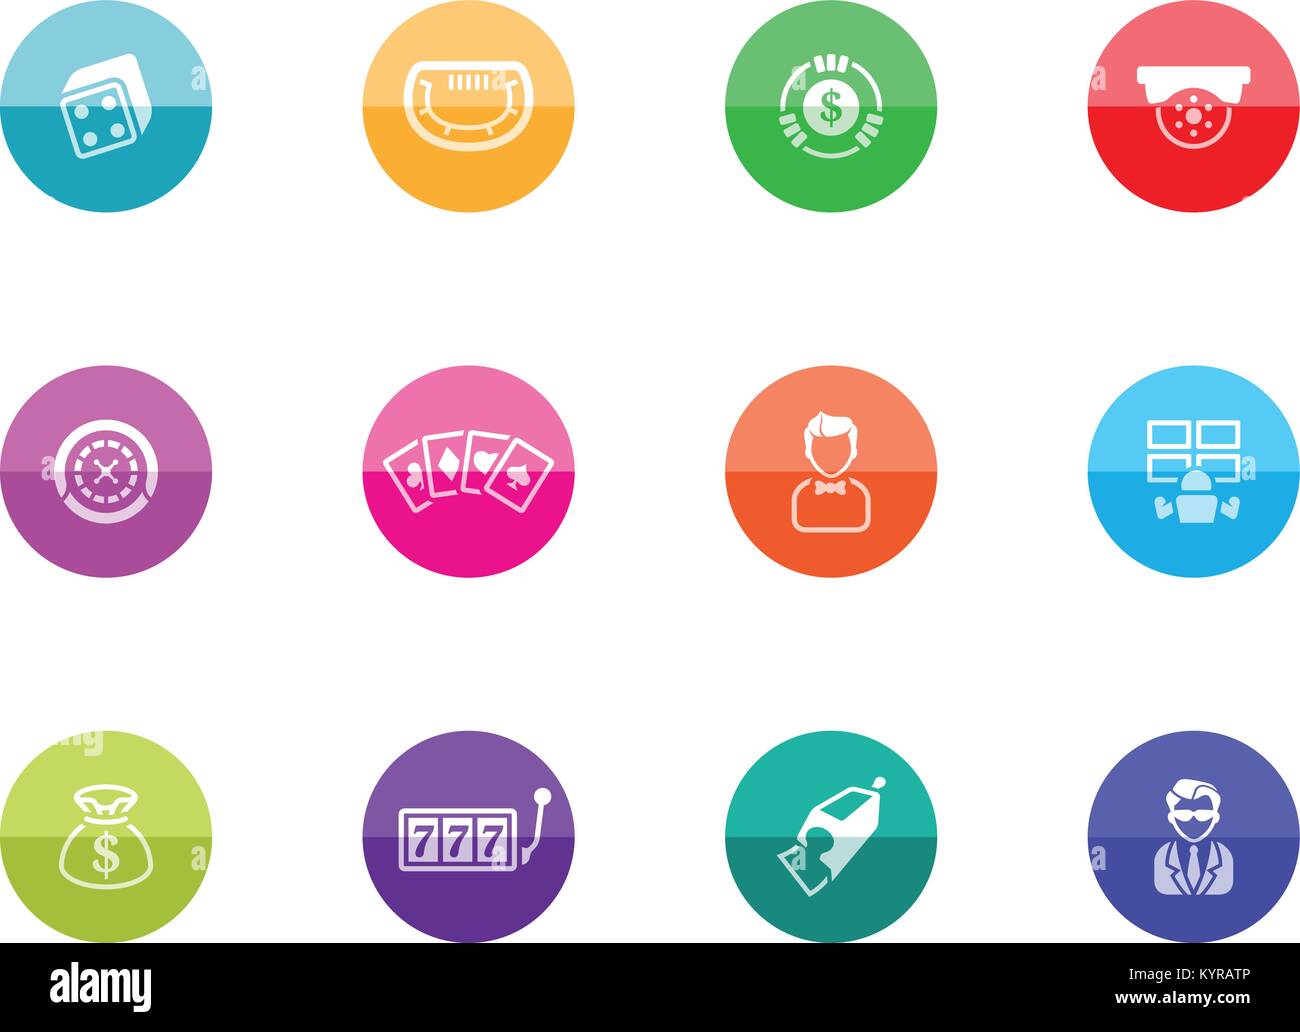 Casino icons in color circles. Vector illustration. Stock Vector